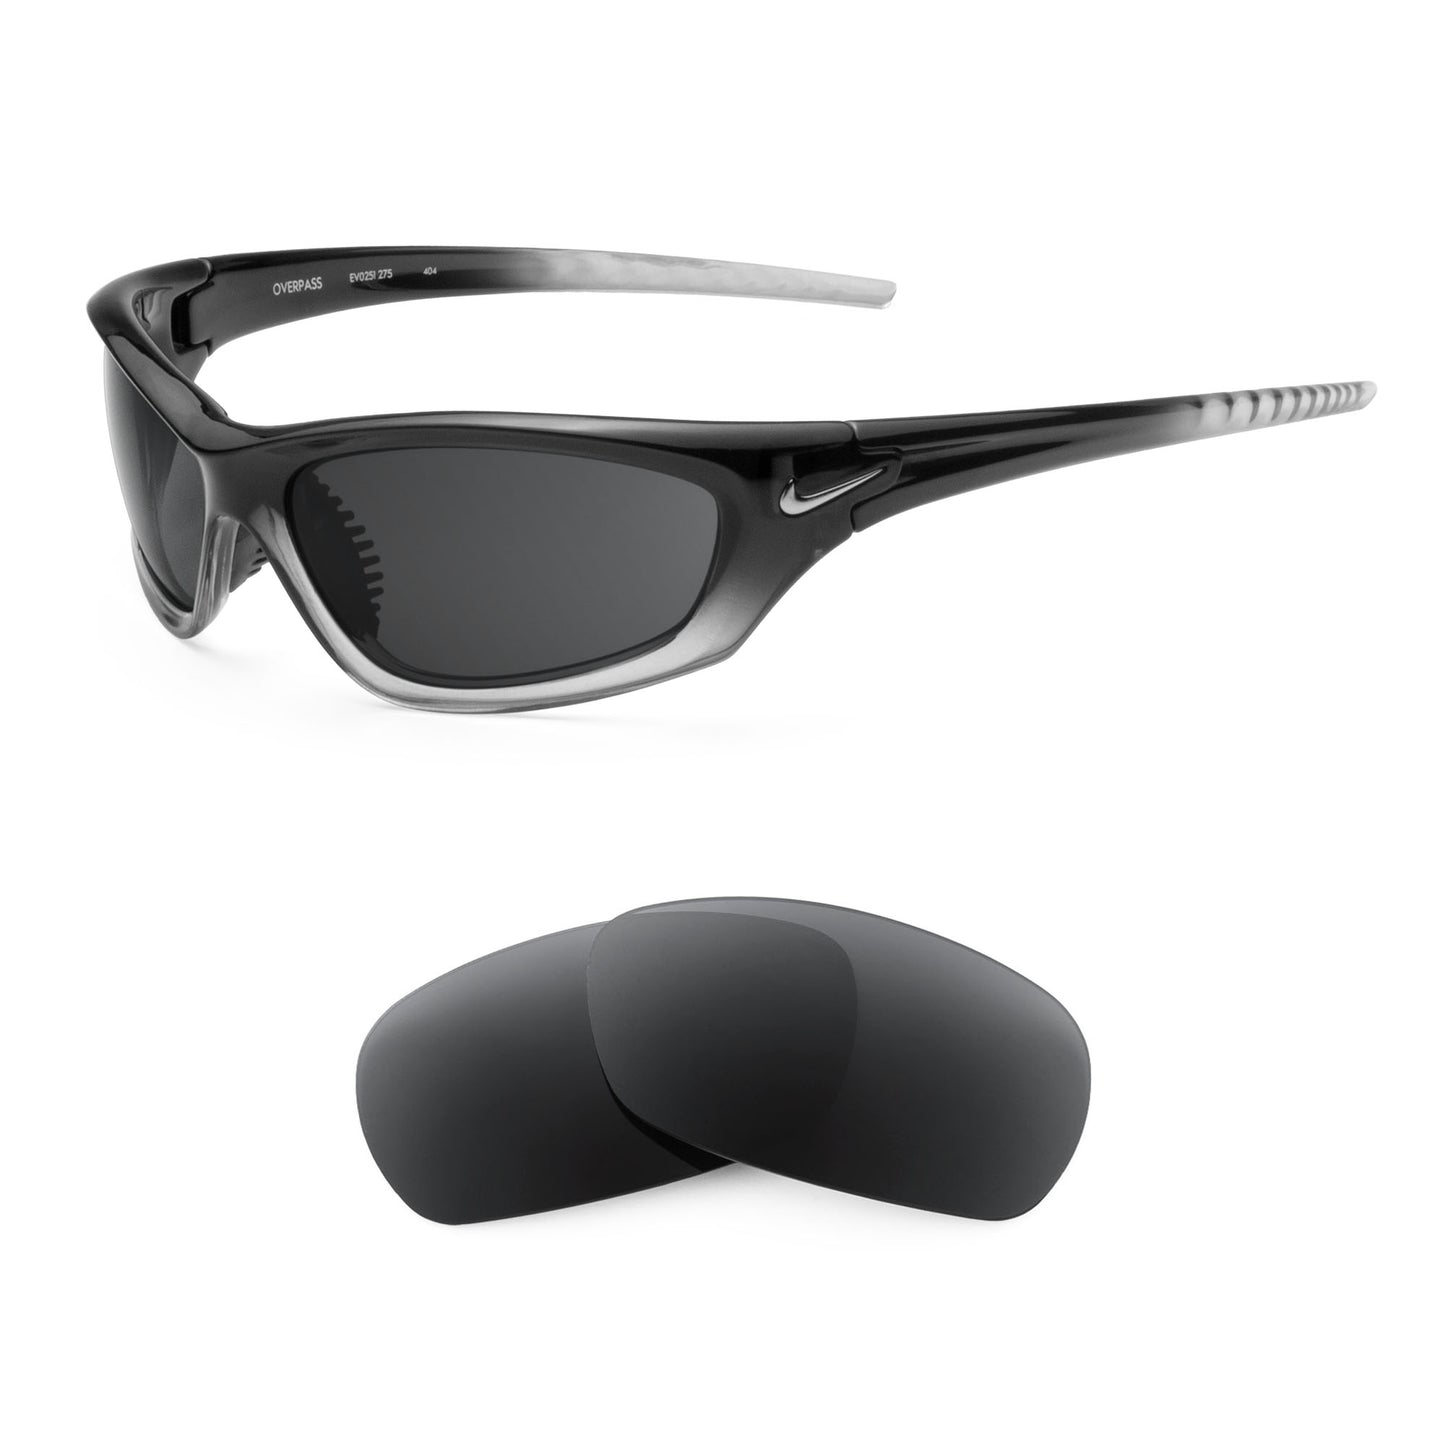 Nike Overpass sunglasses with replacement lenses